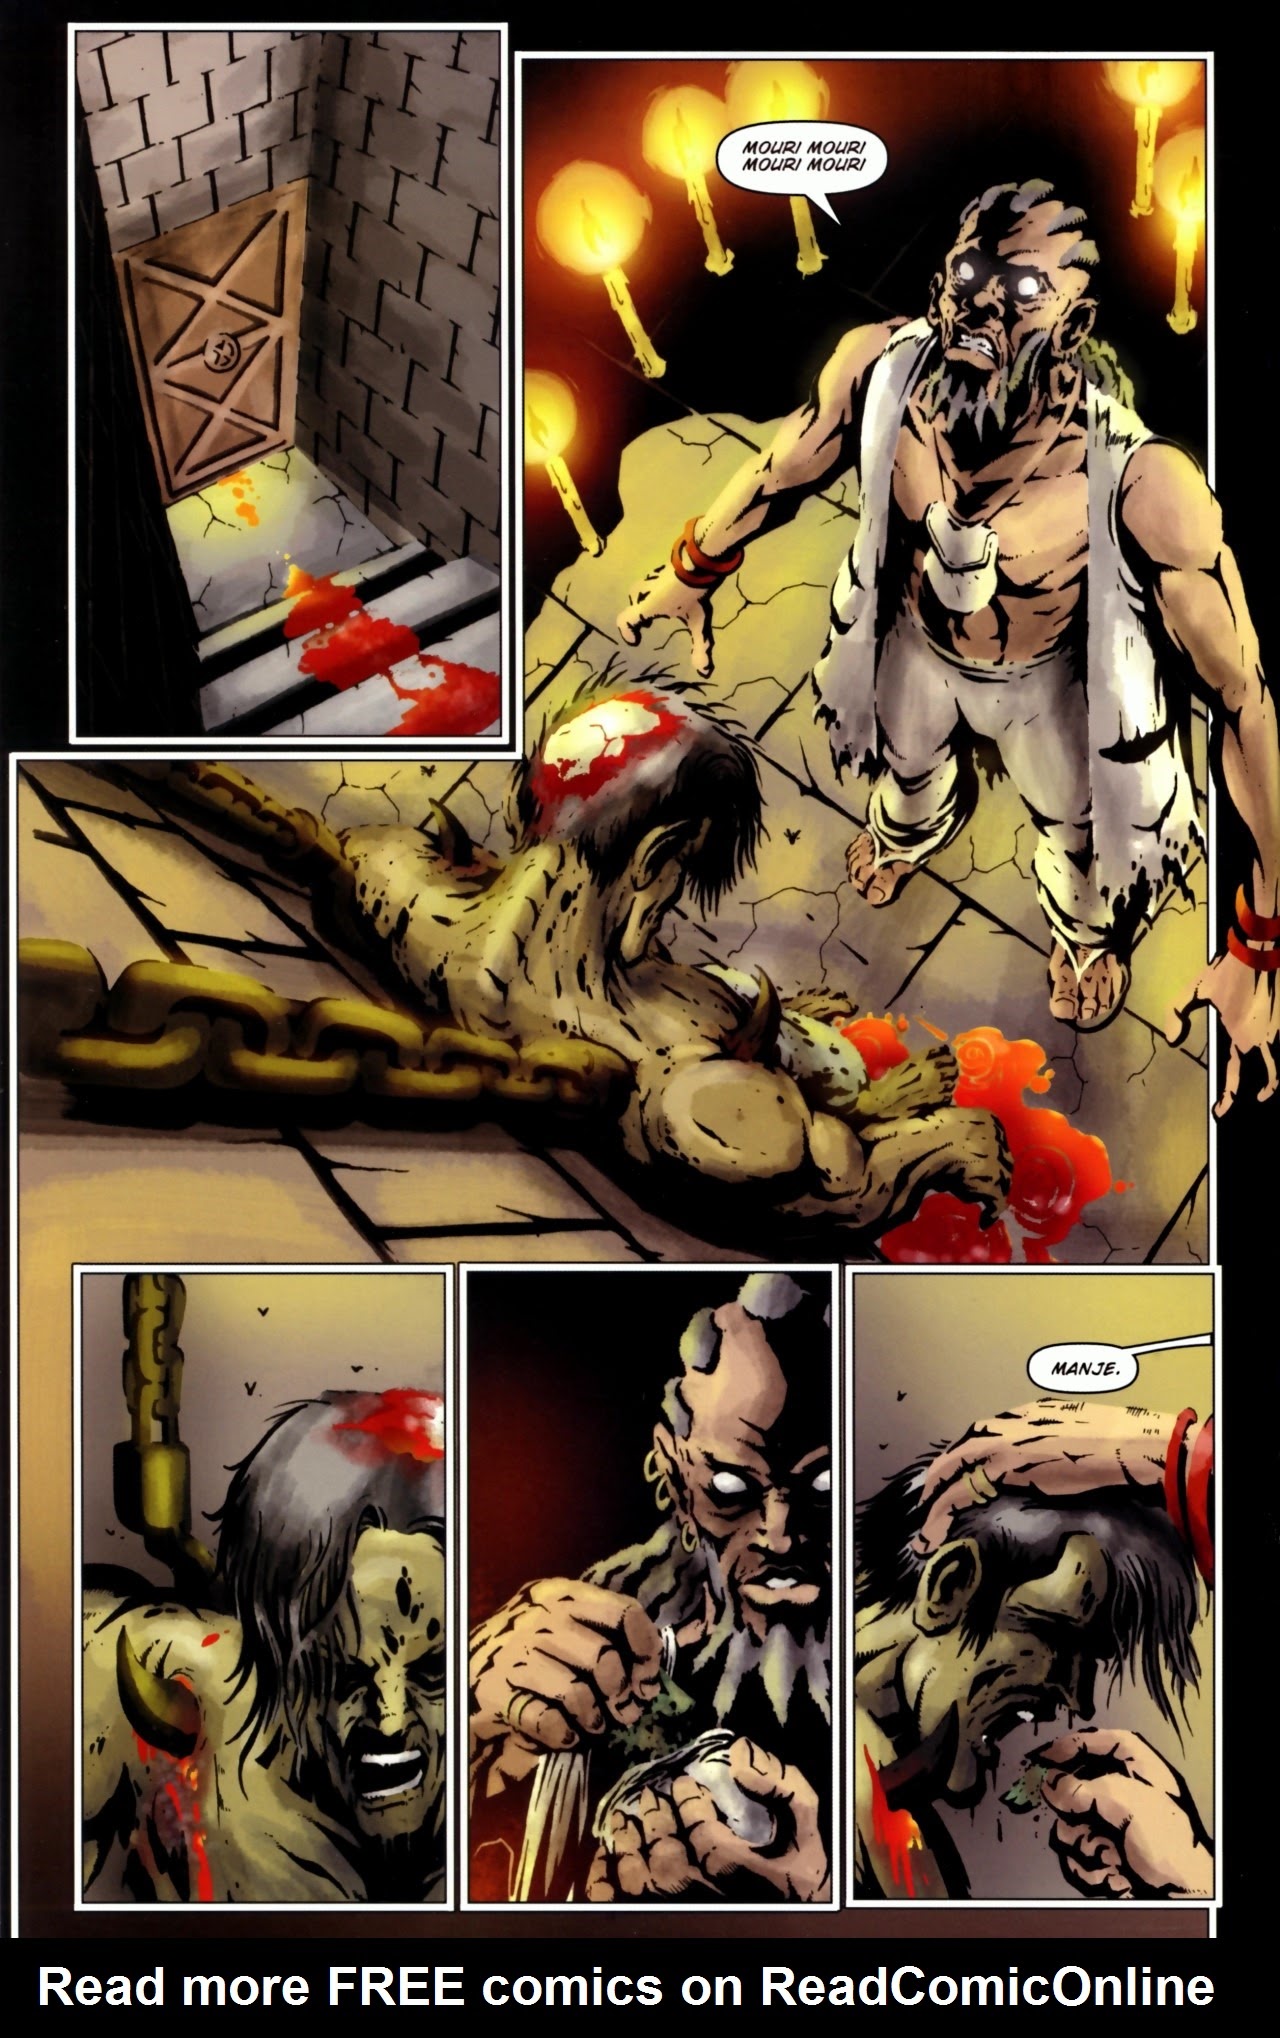 Read online Zombies!: Hunters comic -  Issue # Full - 9